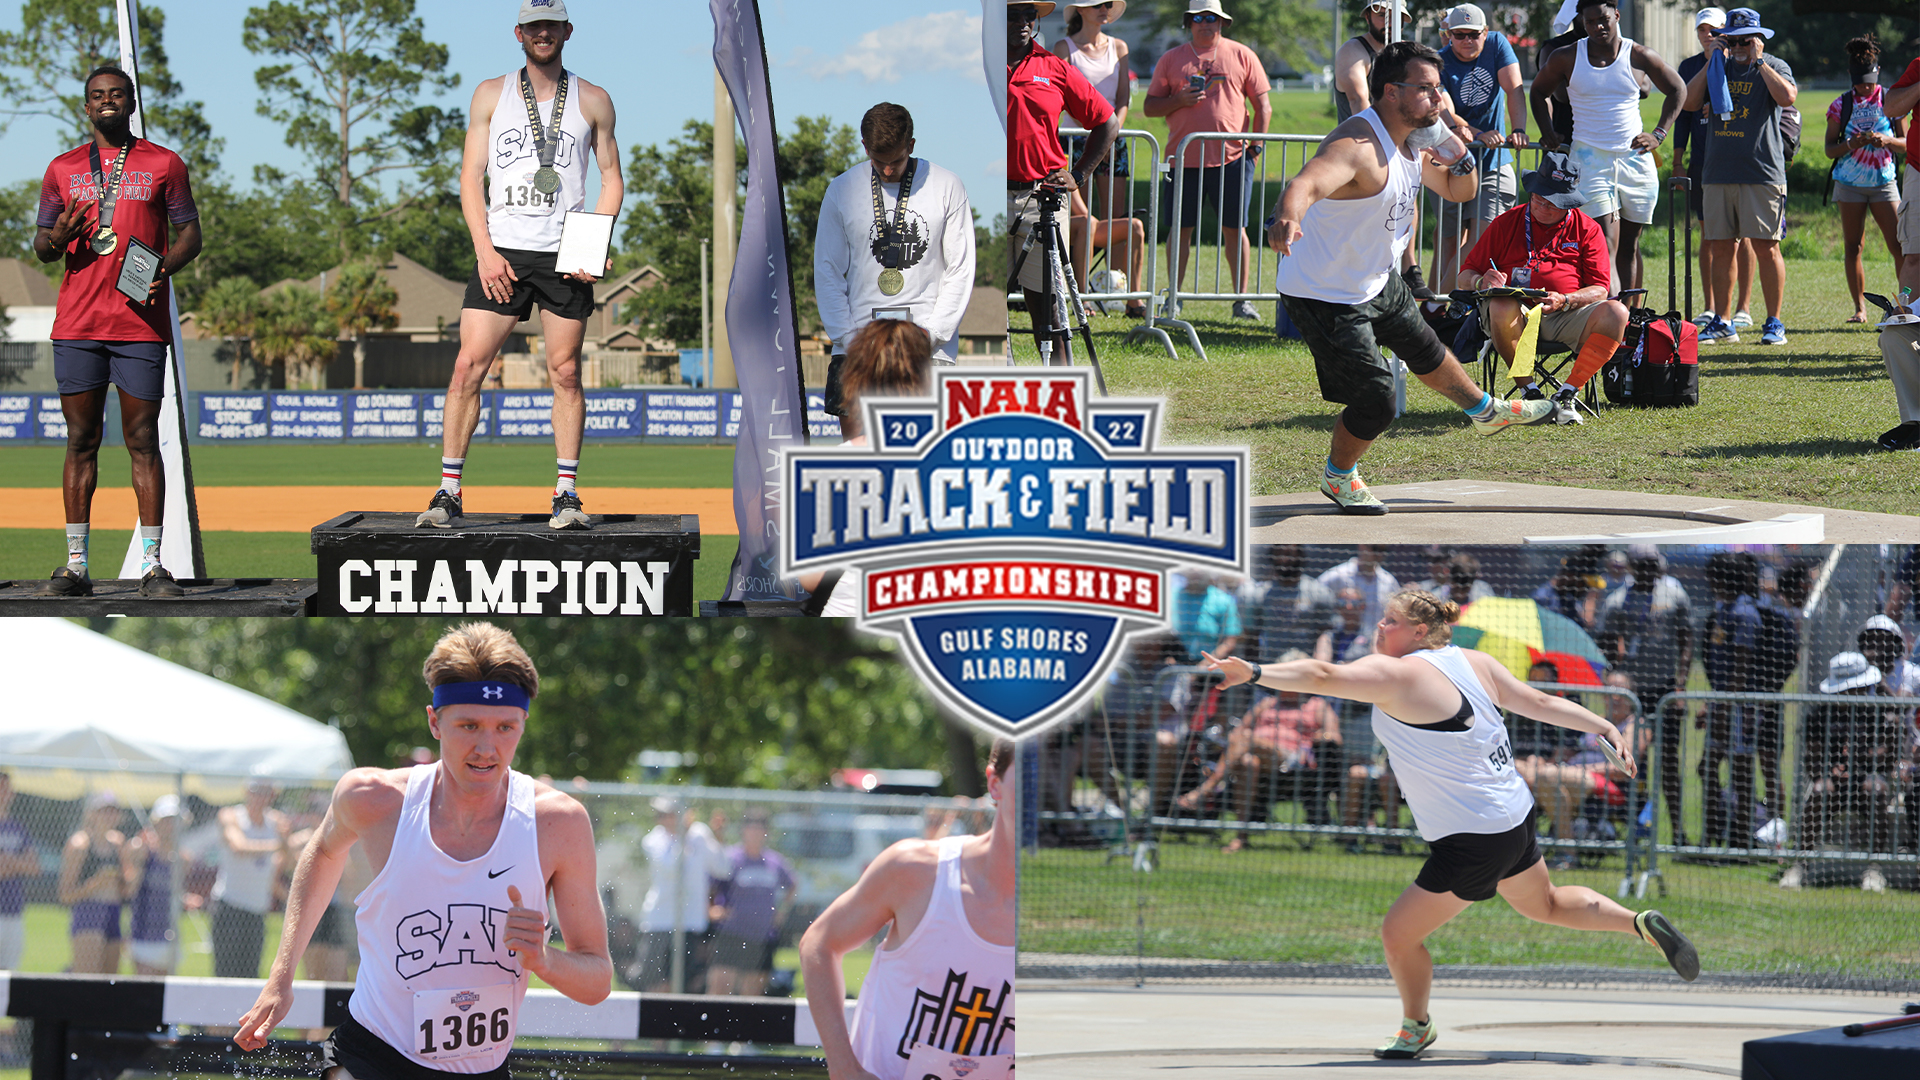 Reemtsma wins national championship, men place 15th at outdoor nationals